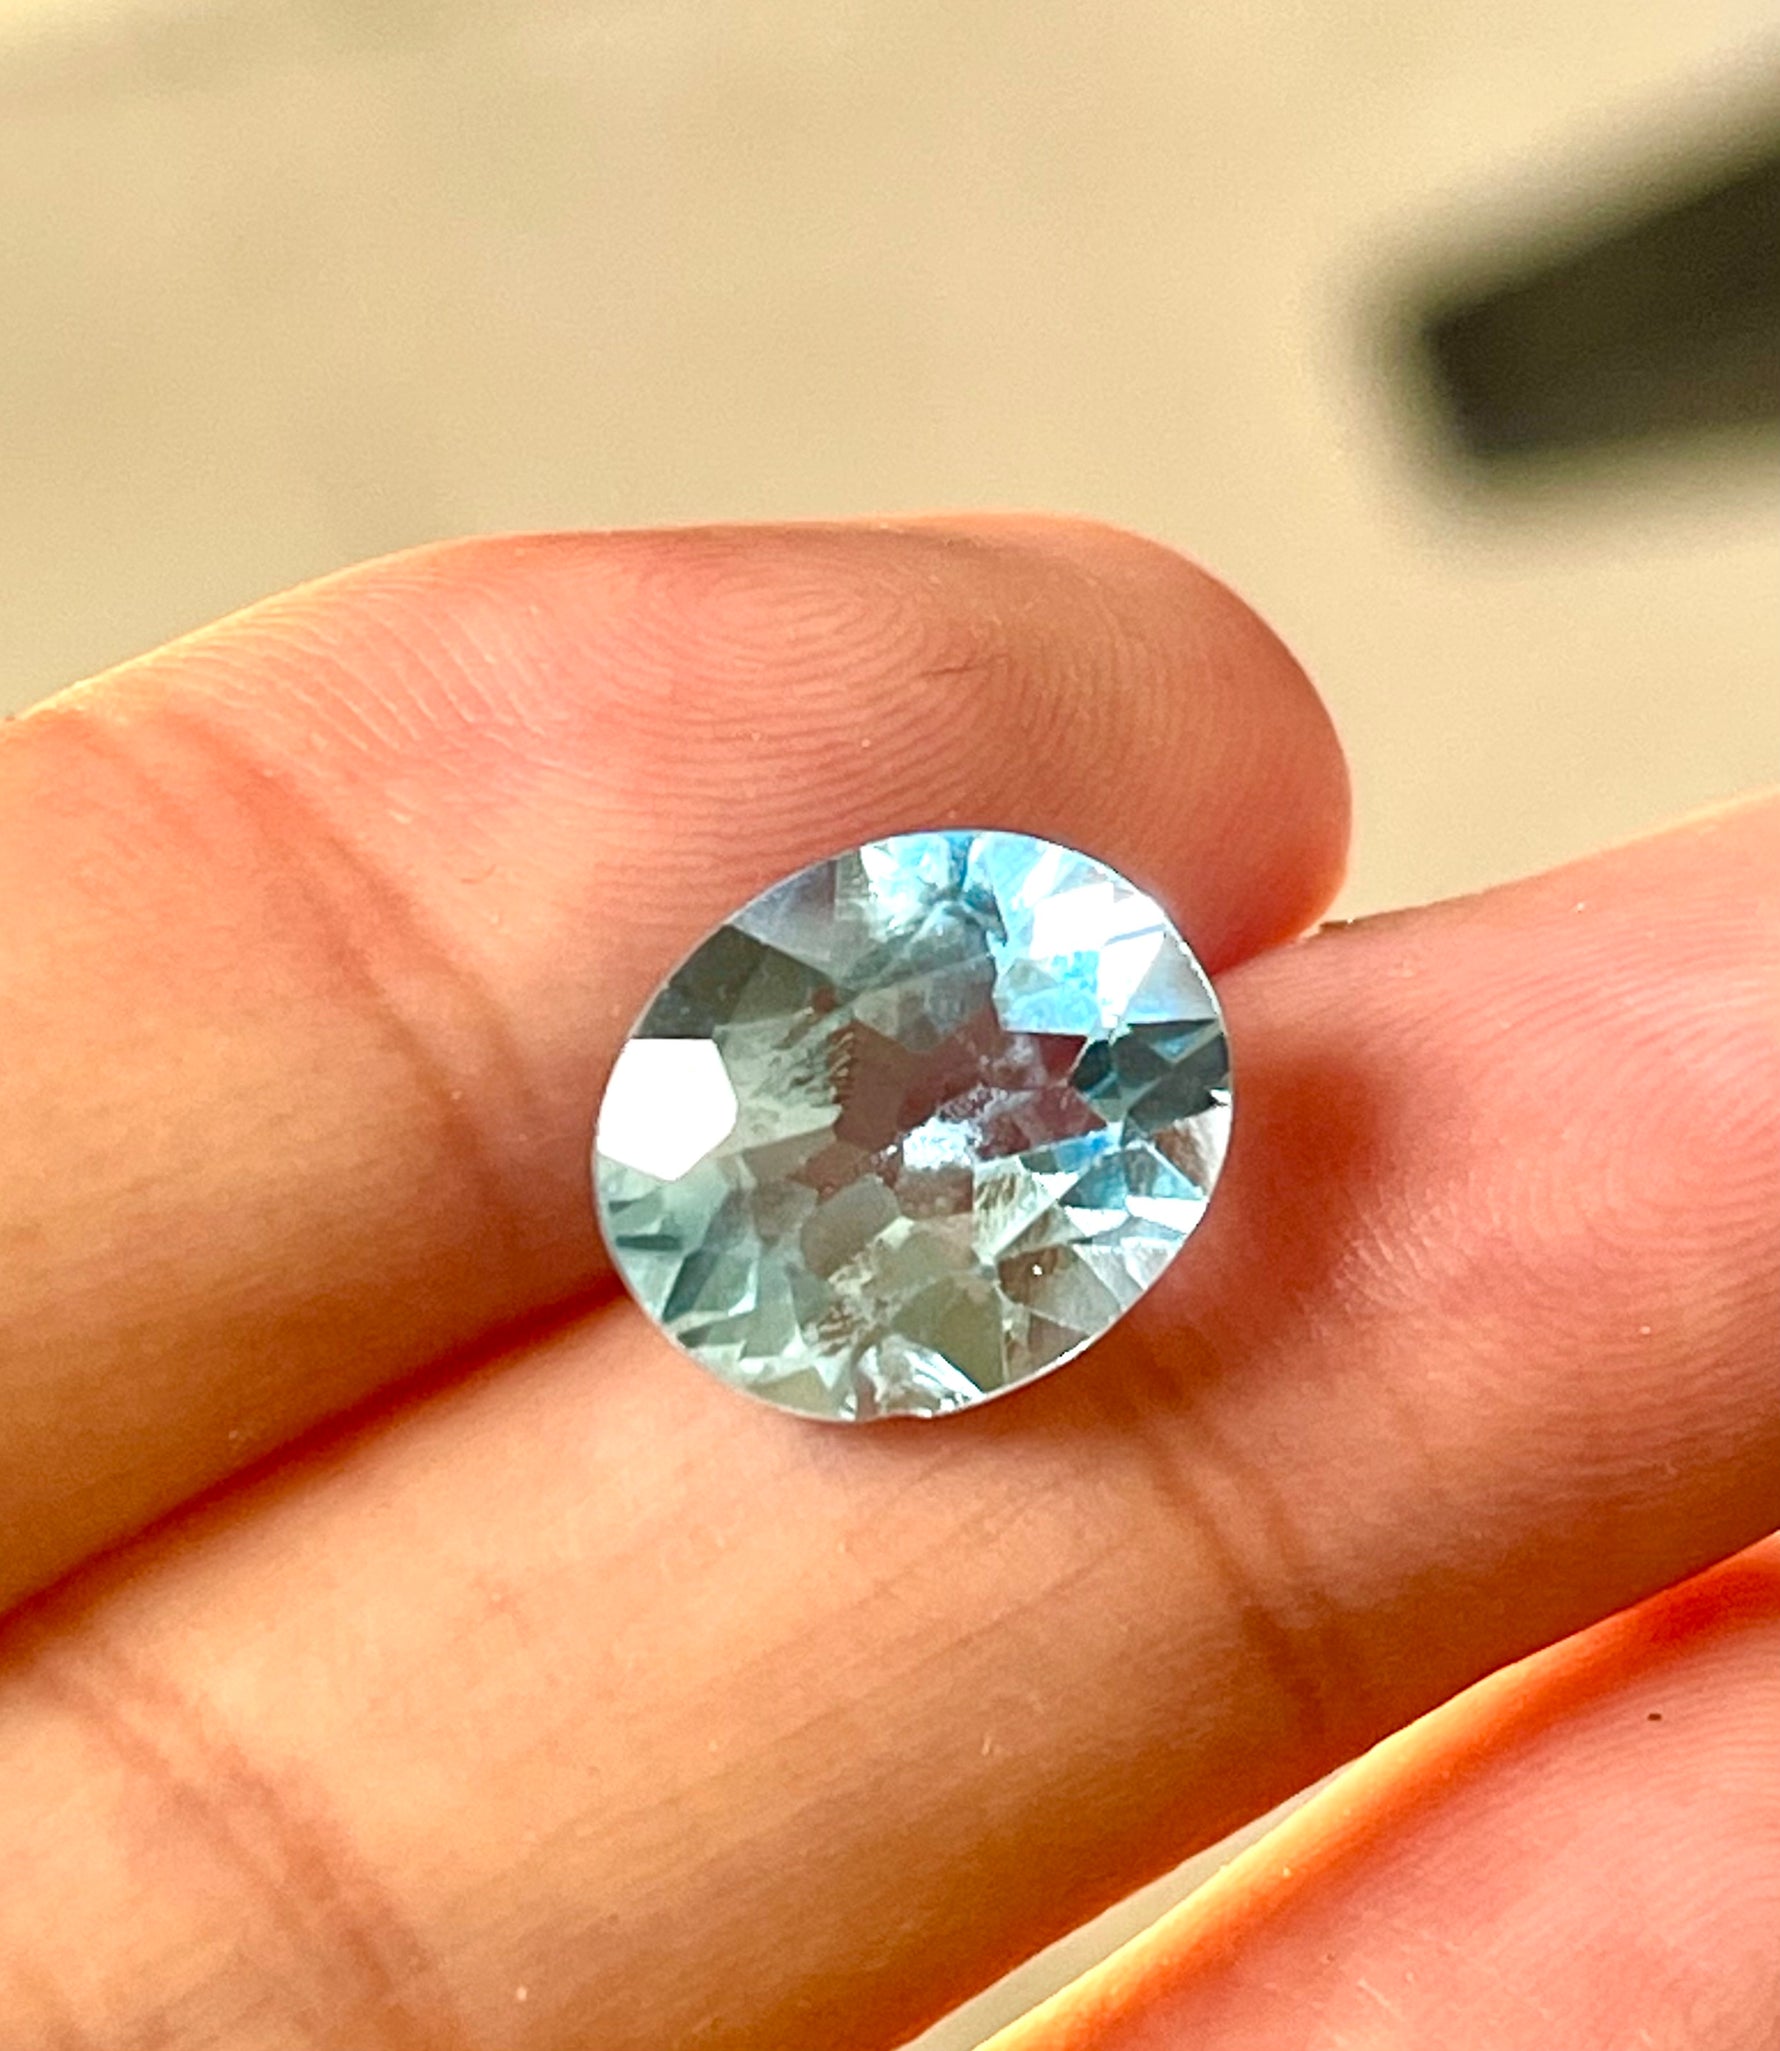 You May ALso LIke This Topaz stone.